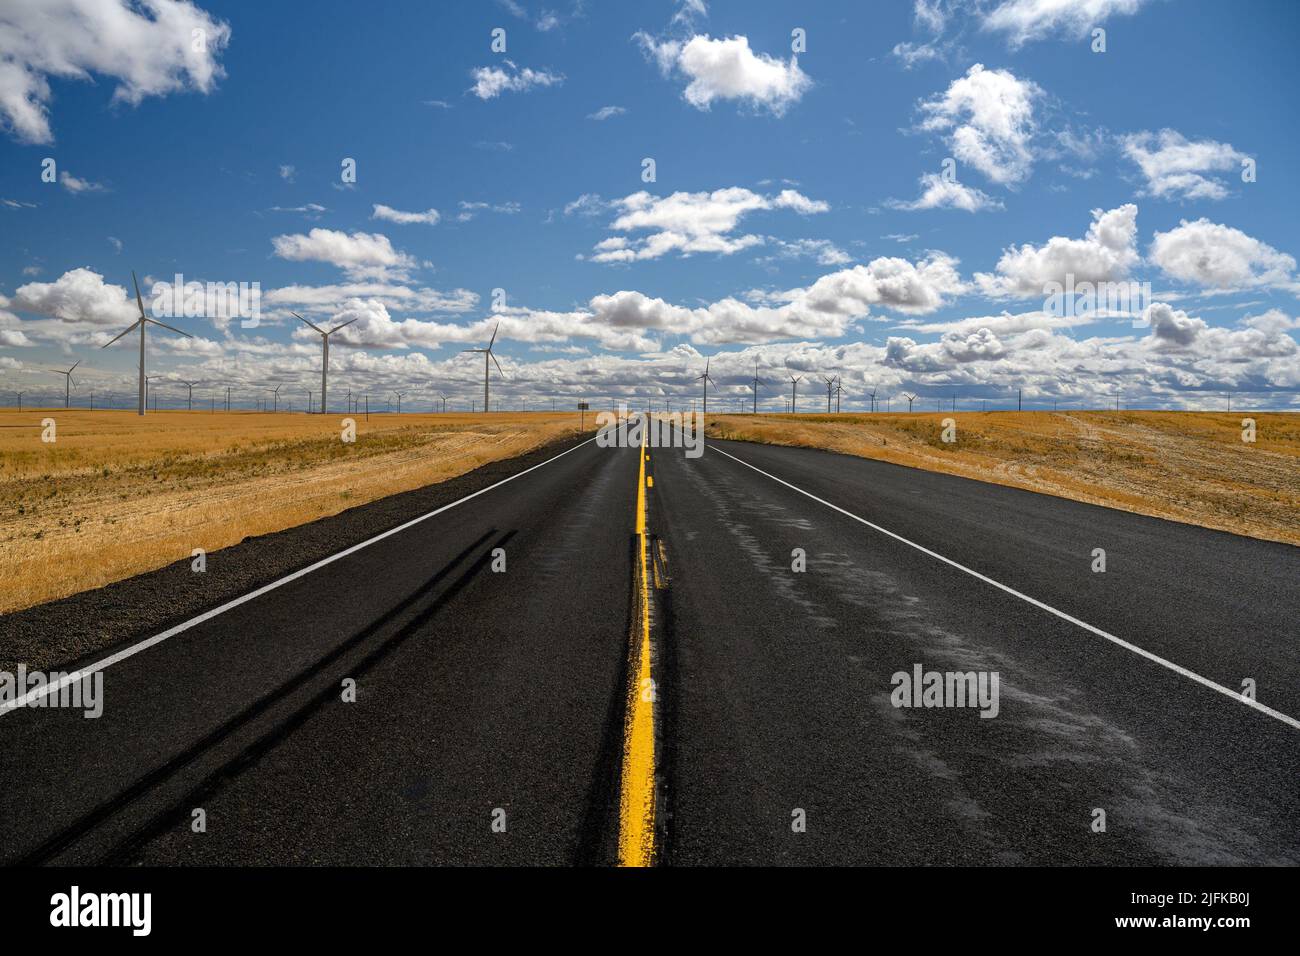 Empty road goes through an open land hundreds of wind turbines on it, in California, United States of America. Stock Photo